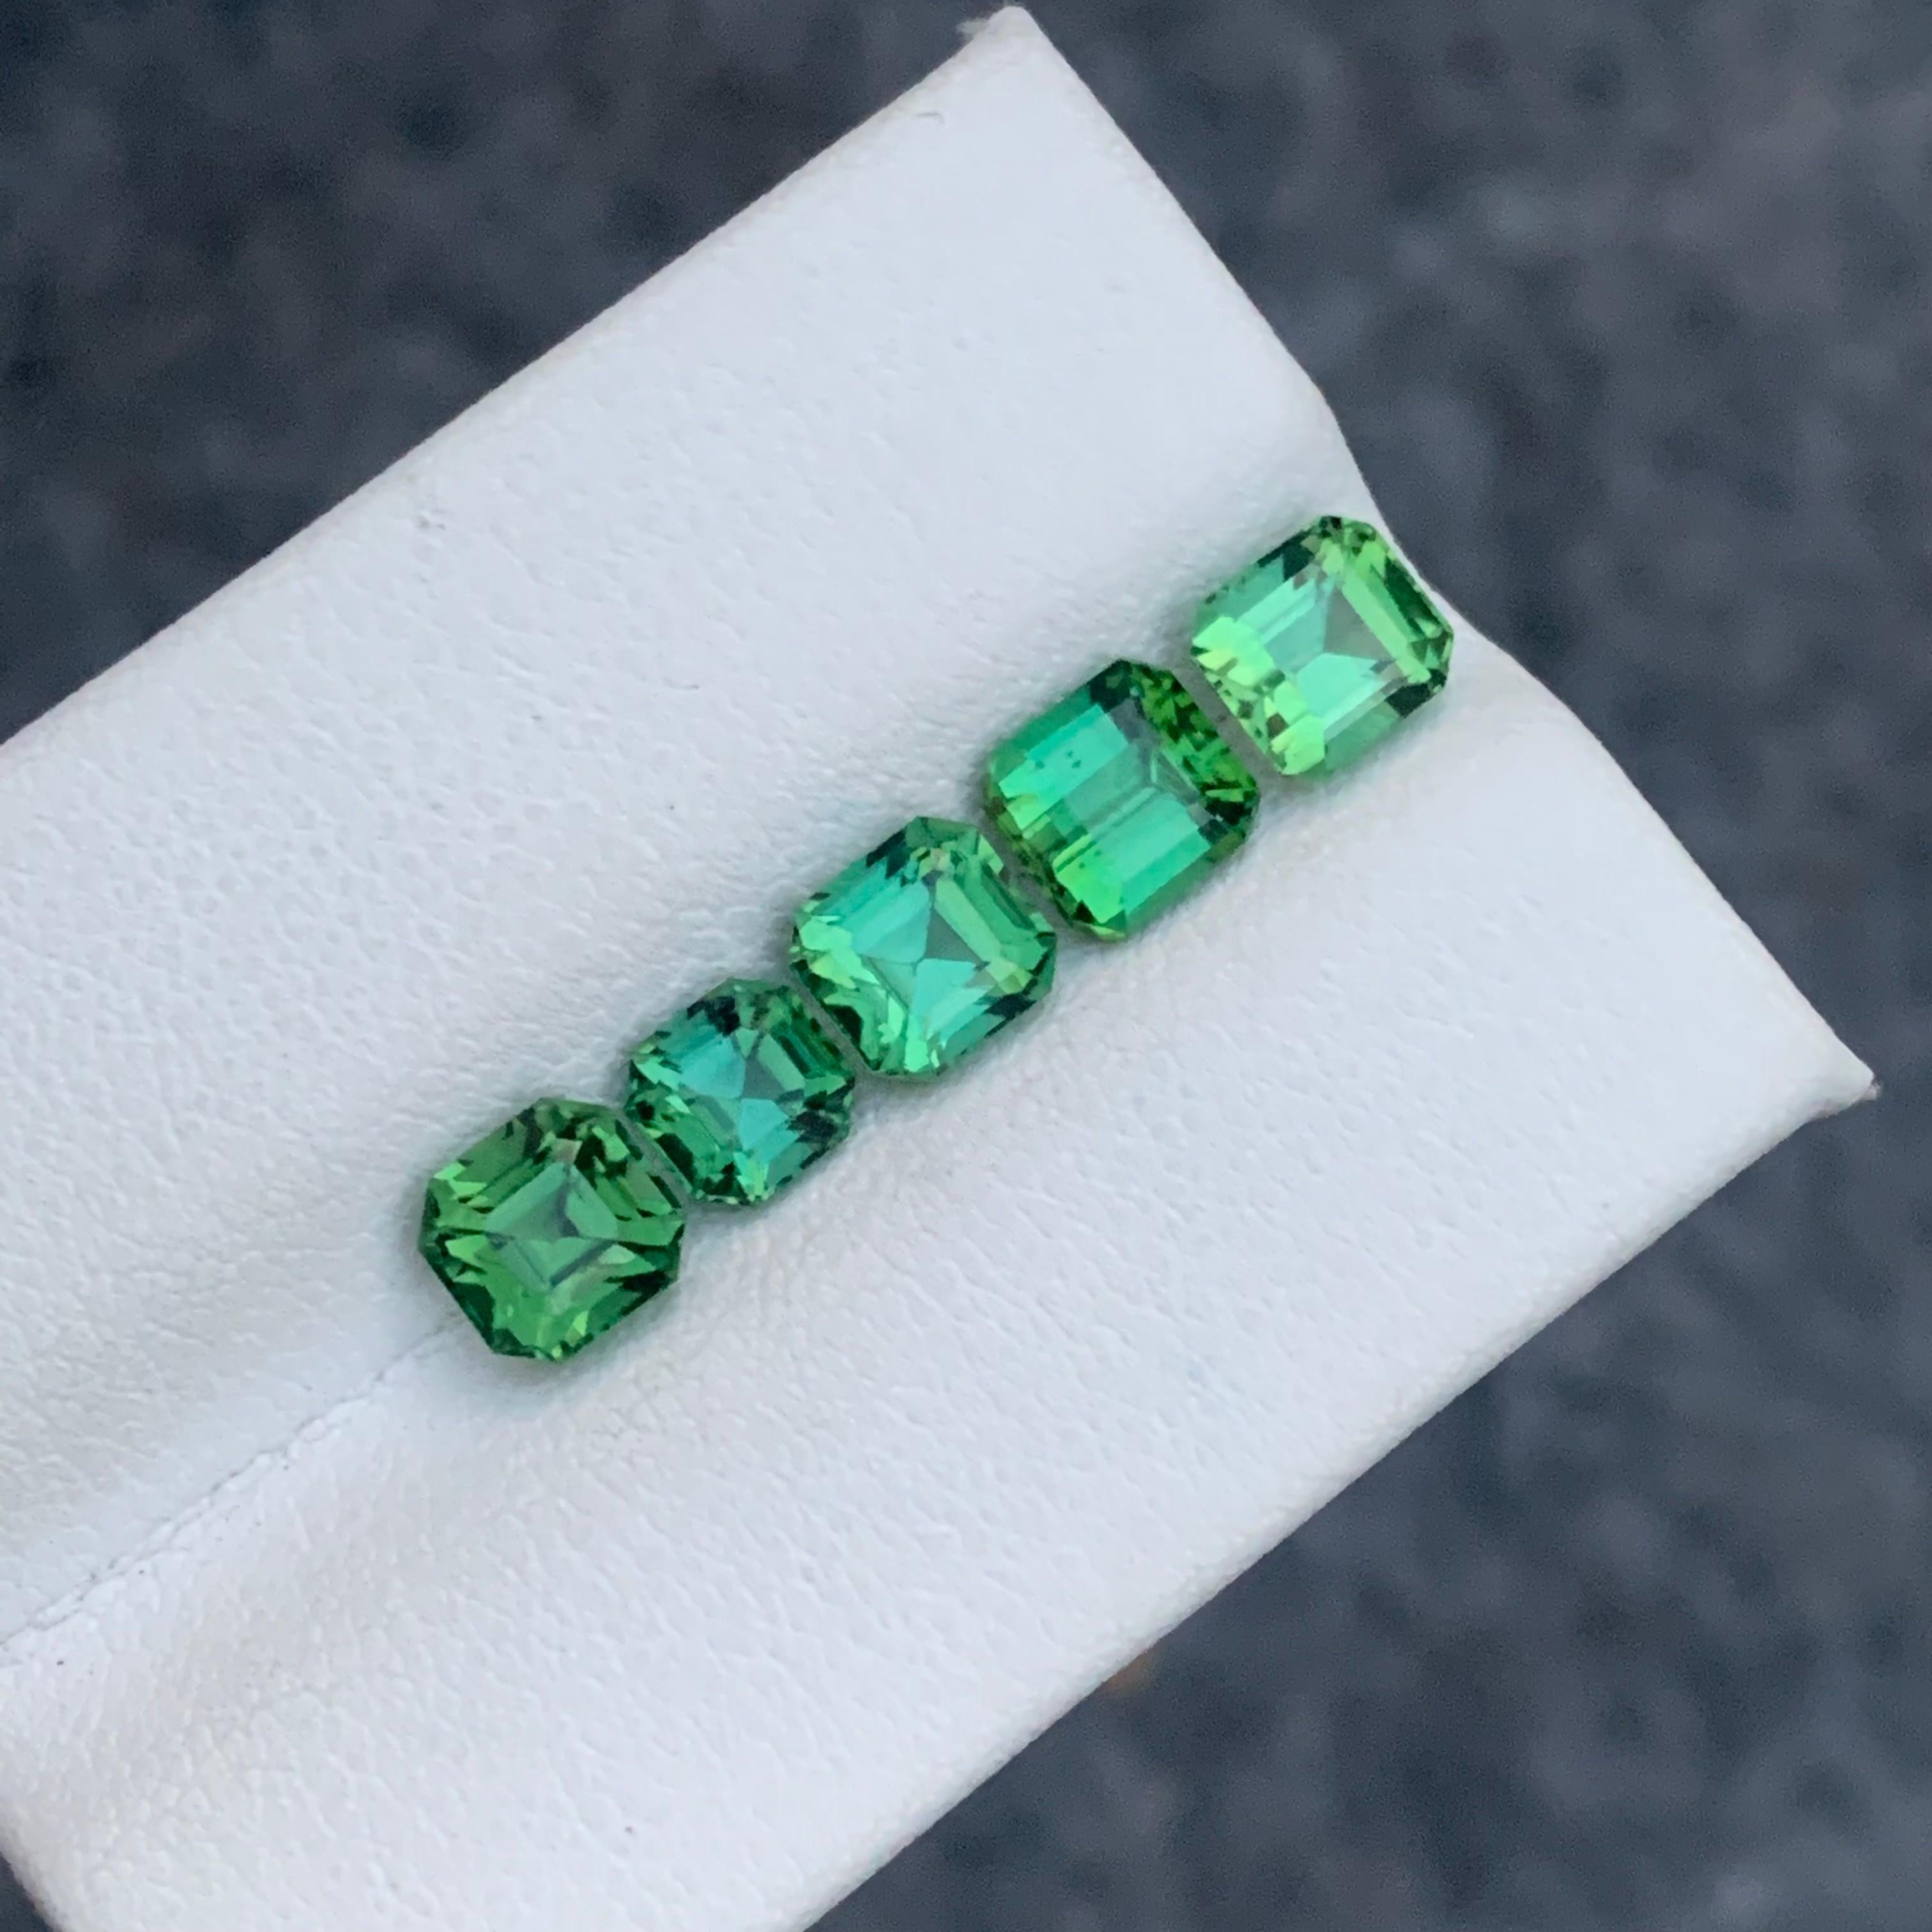 Gemstone Type : Tourmaline
Weight : 4.90 Carats
Size: 0.65 to 10.5 Carat
Origin : Kunar Afghanistan
Clarity : Eye Clean
Shape: Asscher 
Color: Mint Green
Certificate: On Demand
Basically, mint tourmalines are tourmalines with pastel hues of light